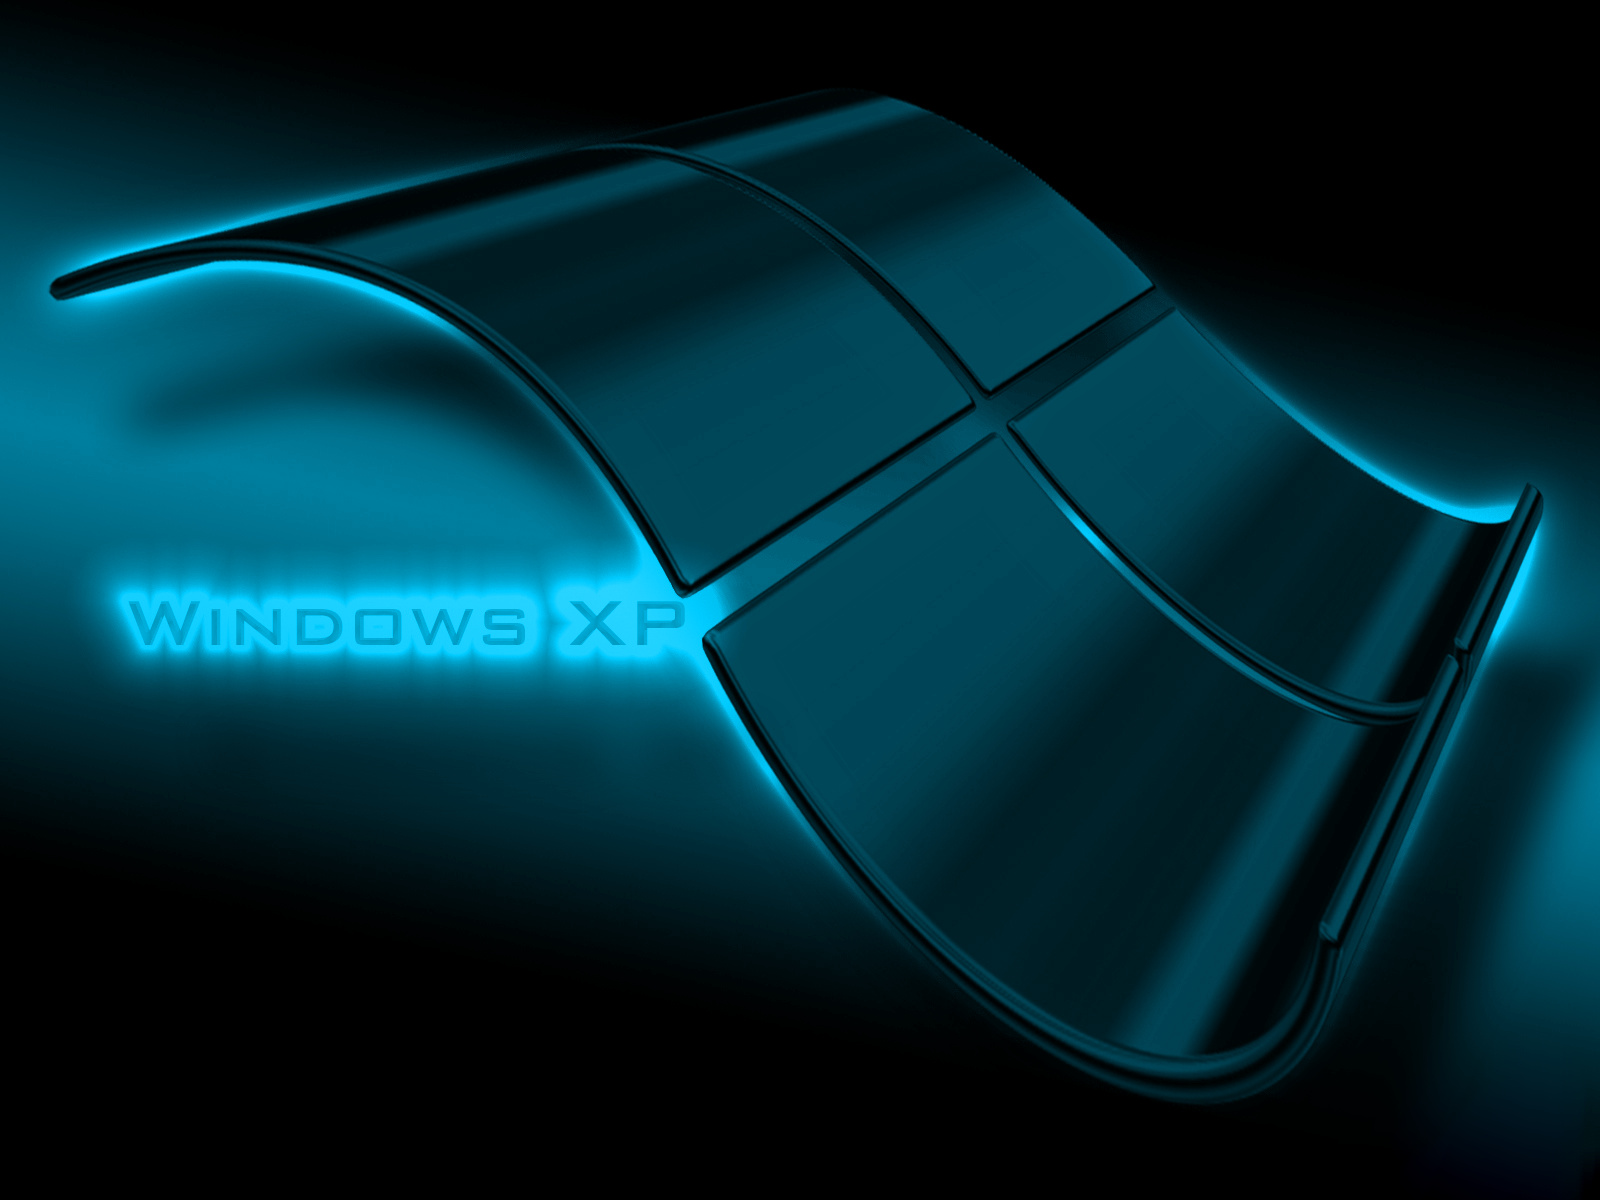 3d wallpapers for desktop windows xp is the sources of 3d wallpapers 1600x1200